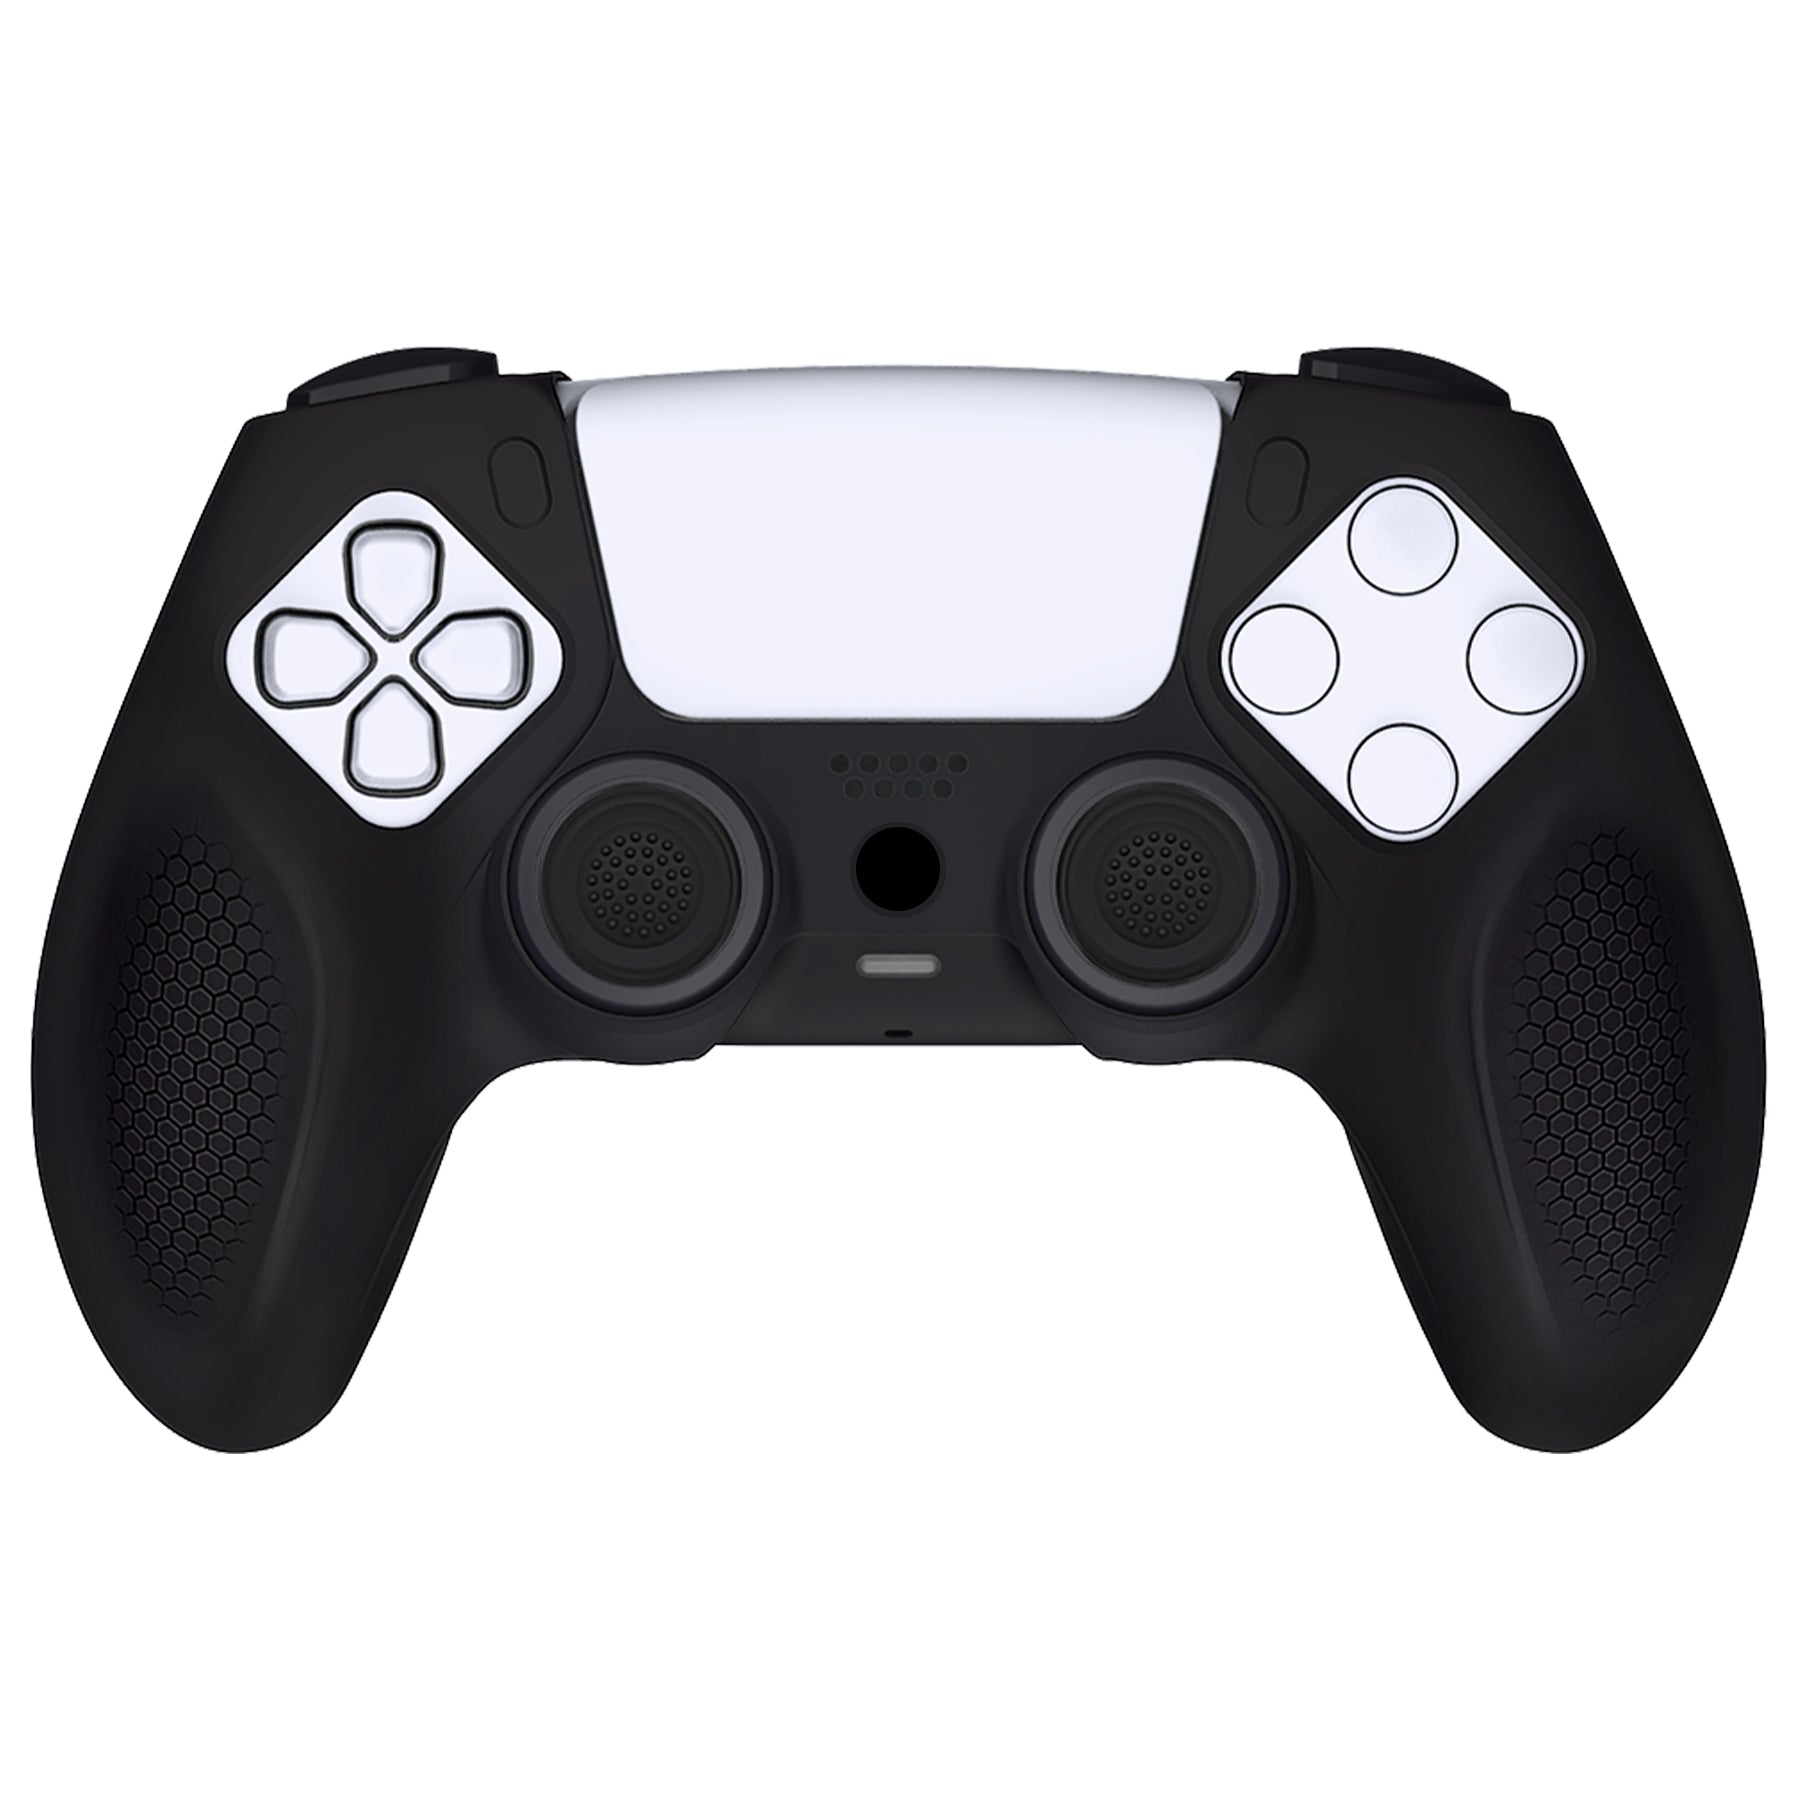 PlayVital Ninja Edition Anti-Slip Silicone Cover Skin with Thumb Grips for PS5 Wireless Controller, Compatible with Charging Station - Black - MQRPFP001 PlayVital